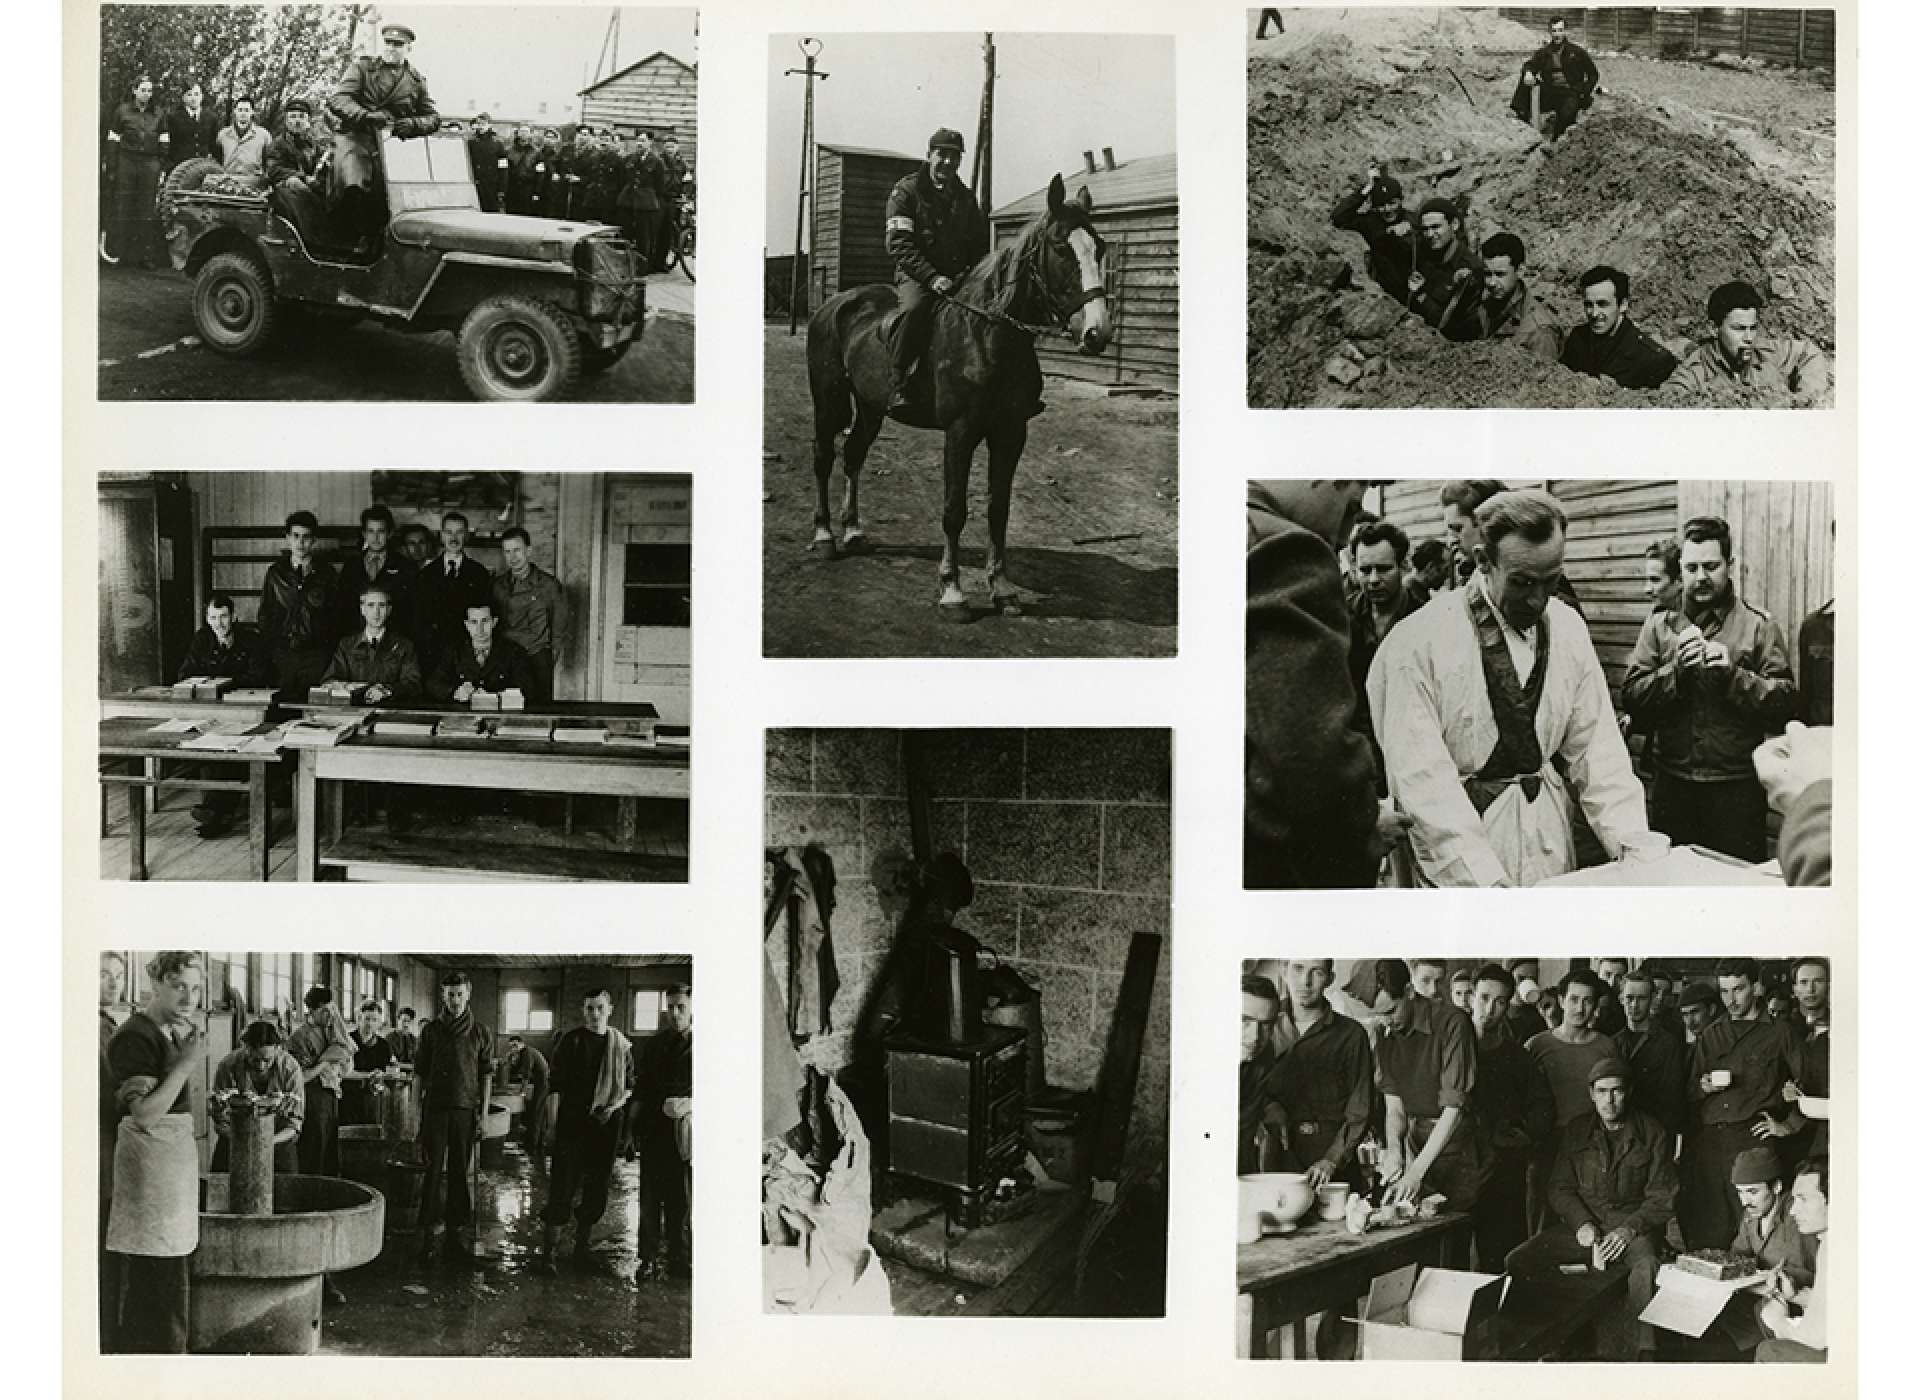 Scenes from Stalag Luft I including top left, “Honor guard of British and American MPs for the departure of Russian General Marozil in a lend-lease jeep.” and top middle, a member of Zemke’s Field Force wearing improvised armband., The National WWII Museum, 2017.145